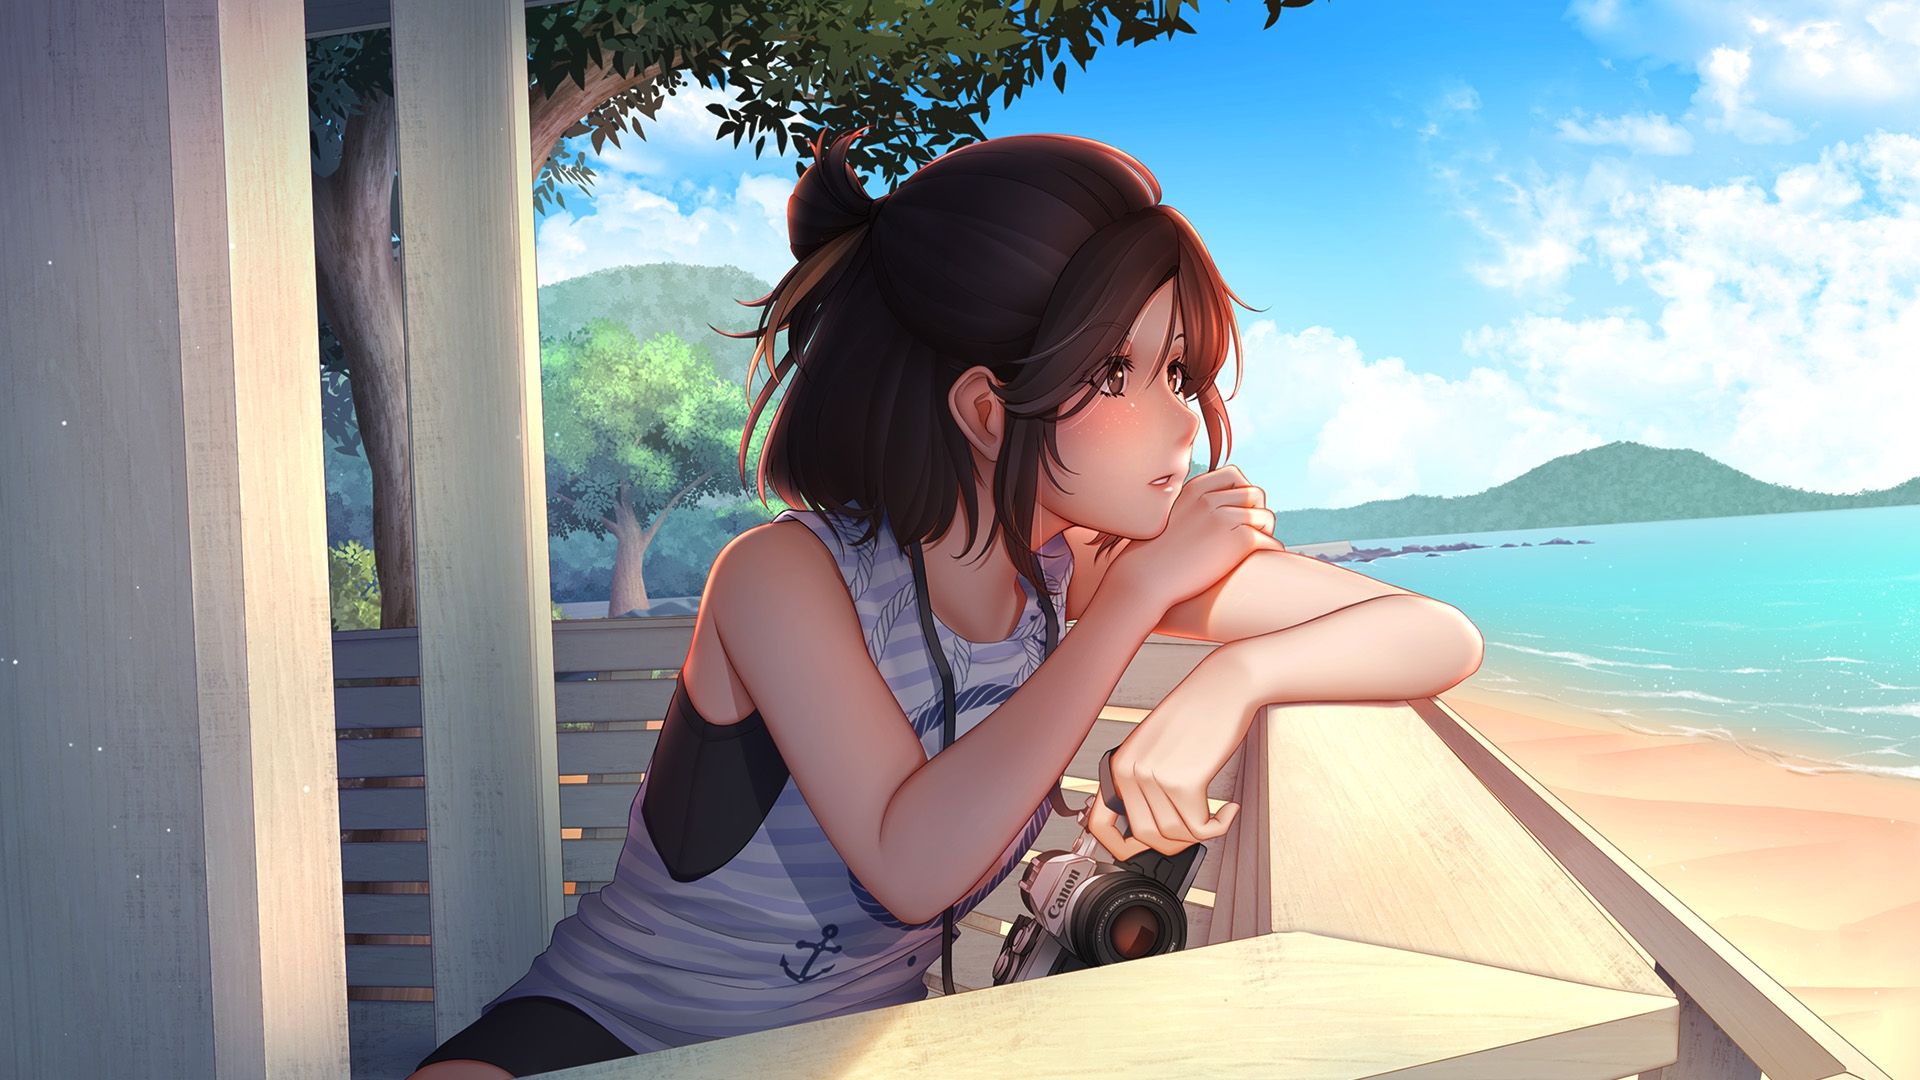 Download 1920x1080 Anime Girl, Summer, Cannon, Looking Away, Semi Realistic, Beach, Sky, Profile View Wallpaper for Widescreen